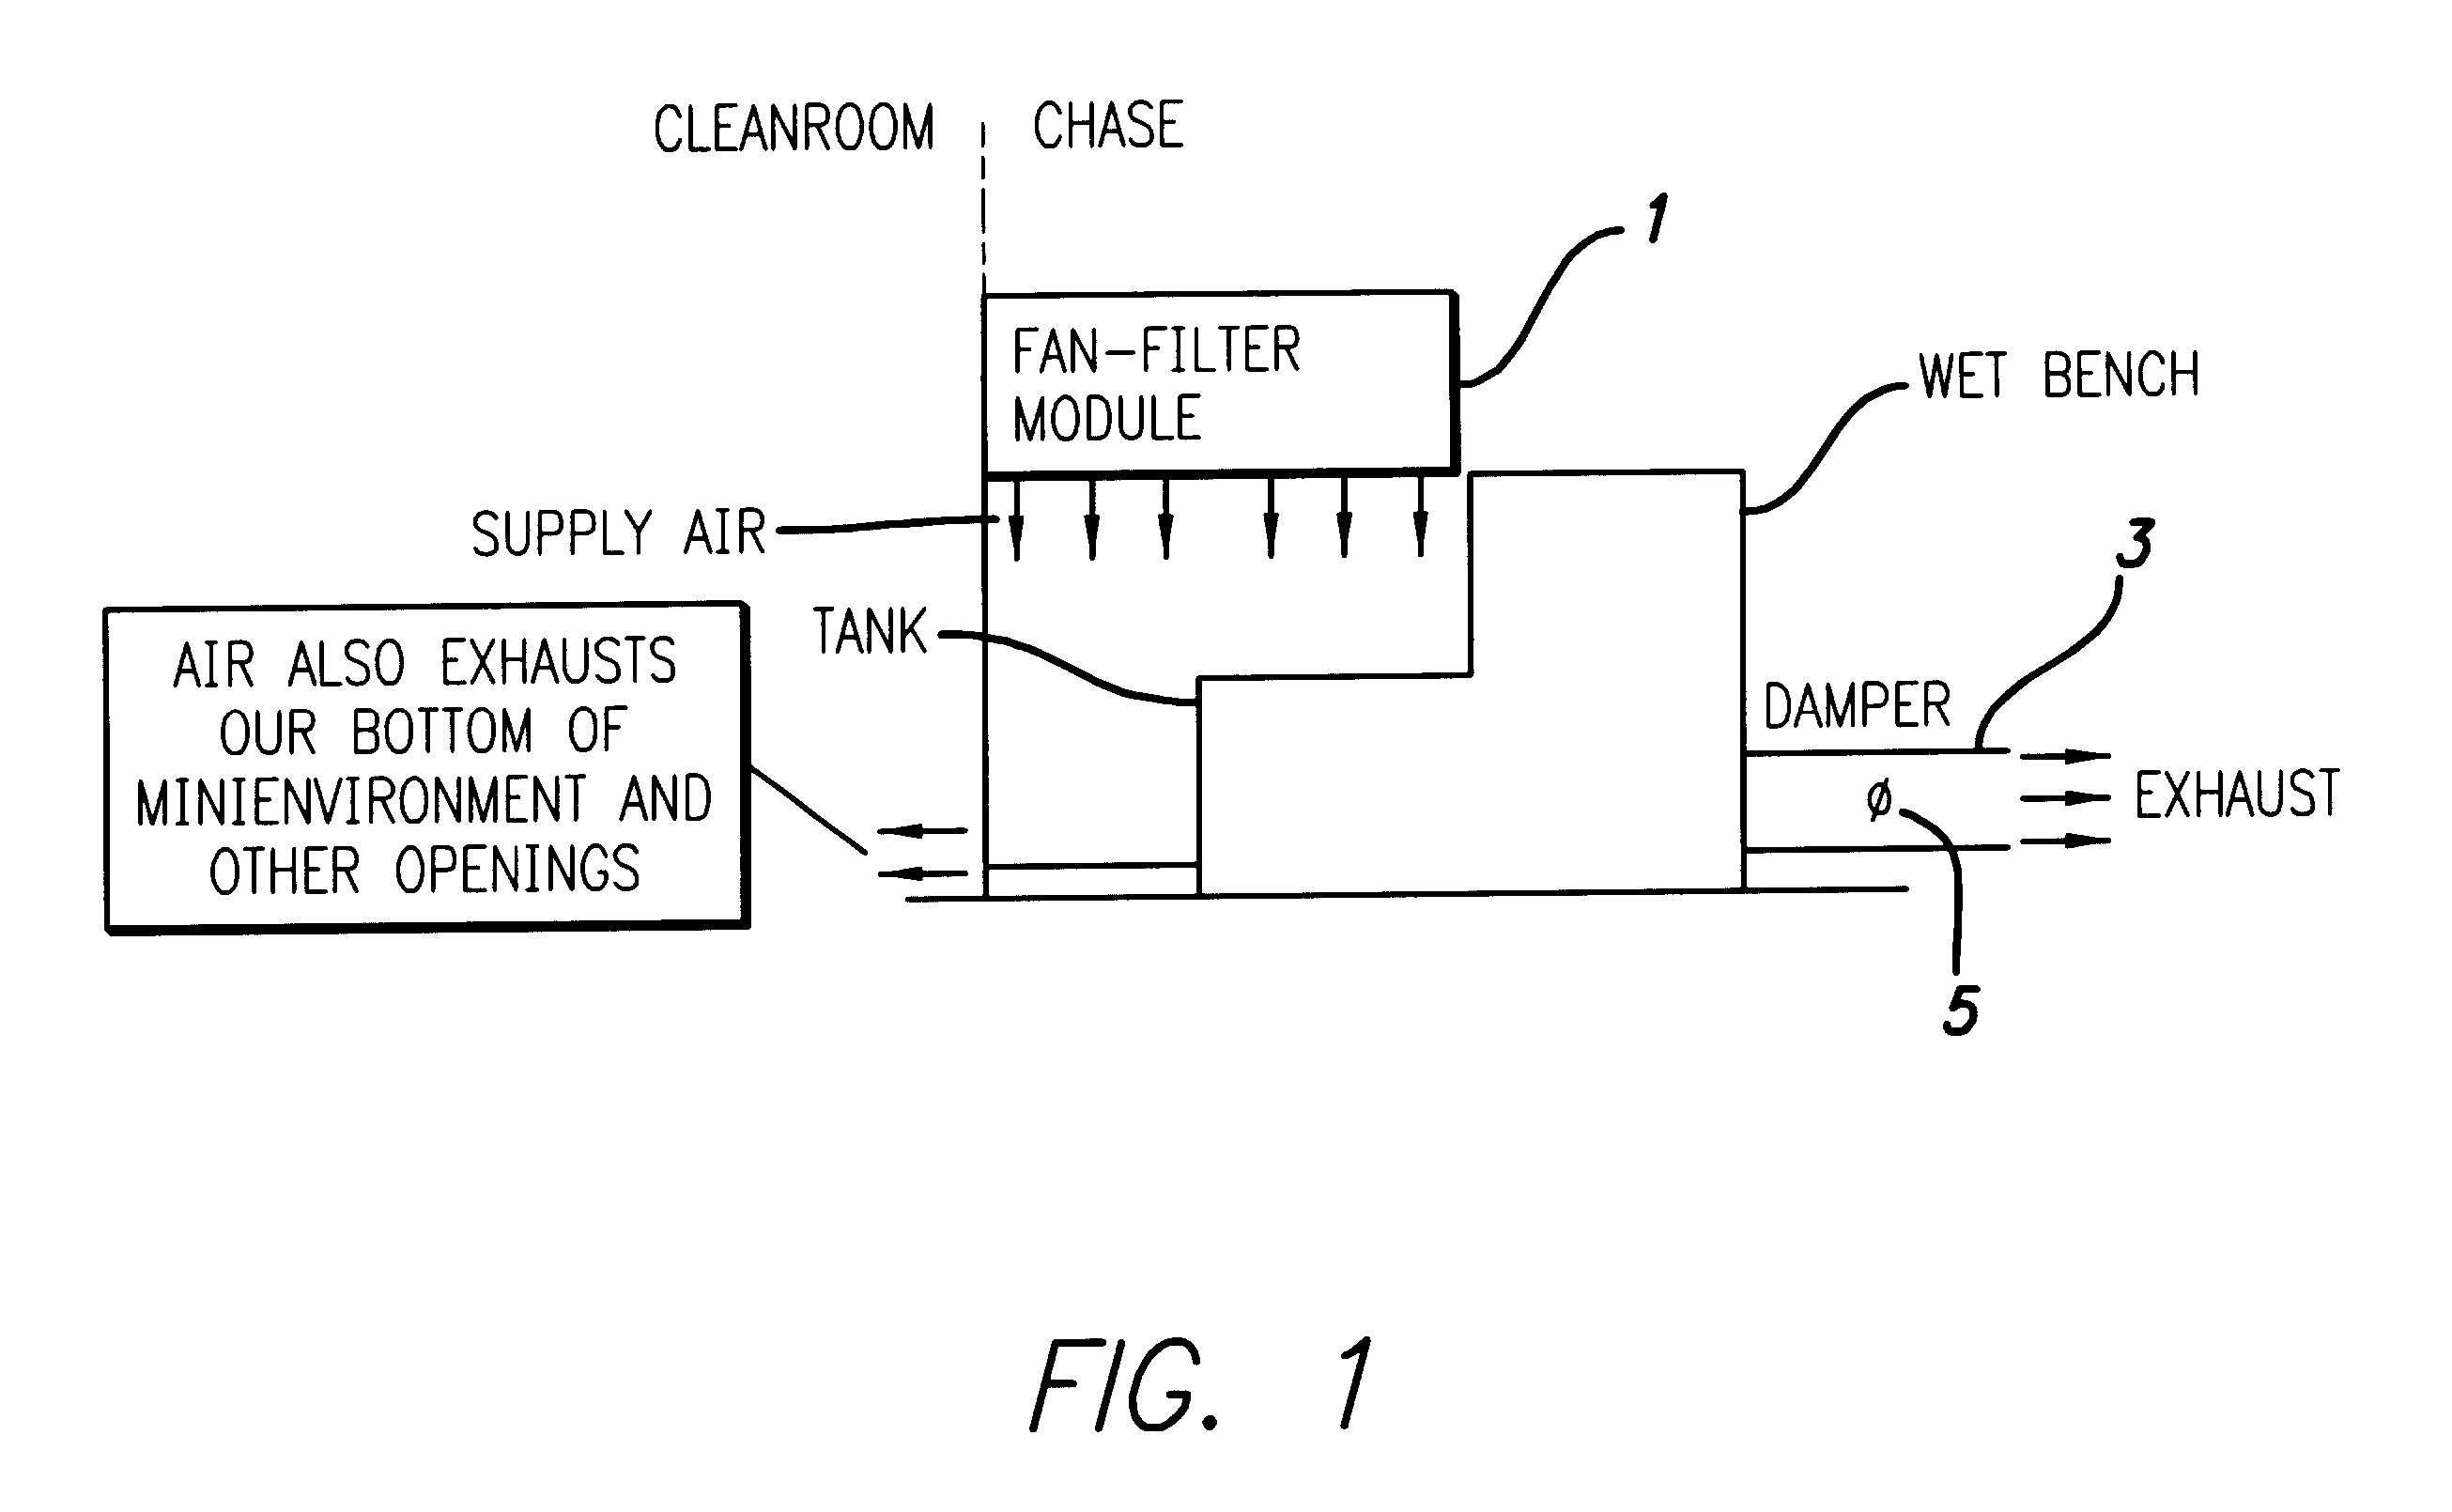 Airflow control valve for a clean room